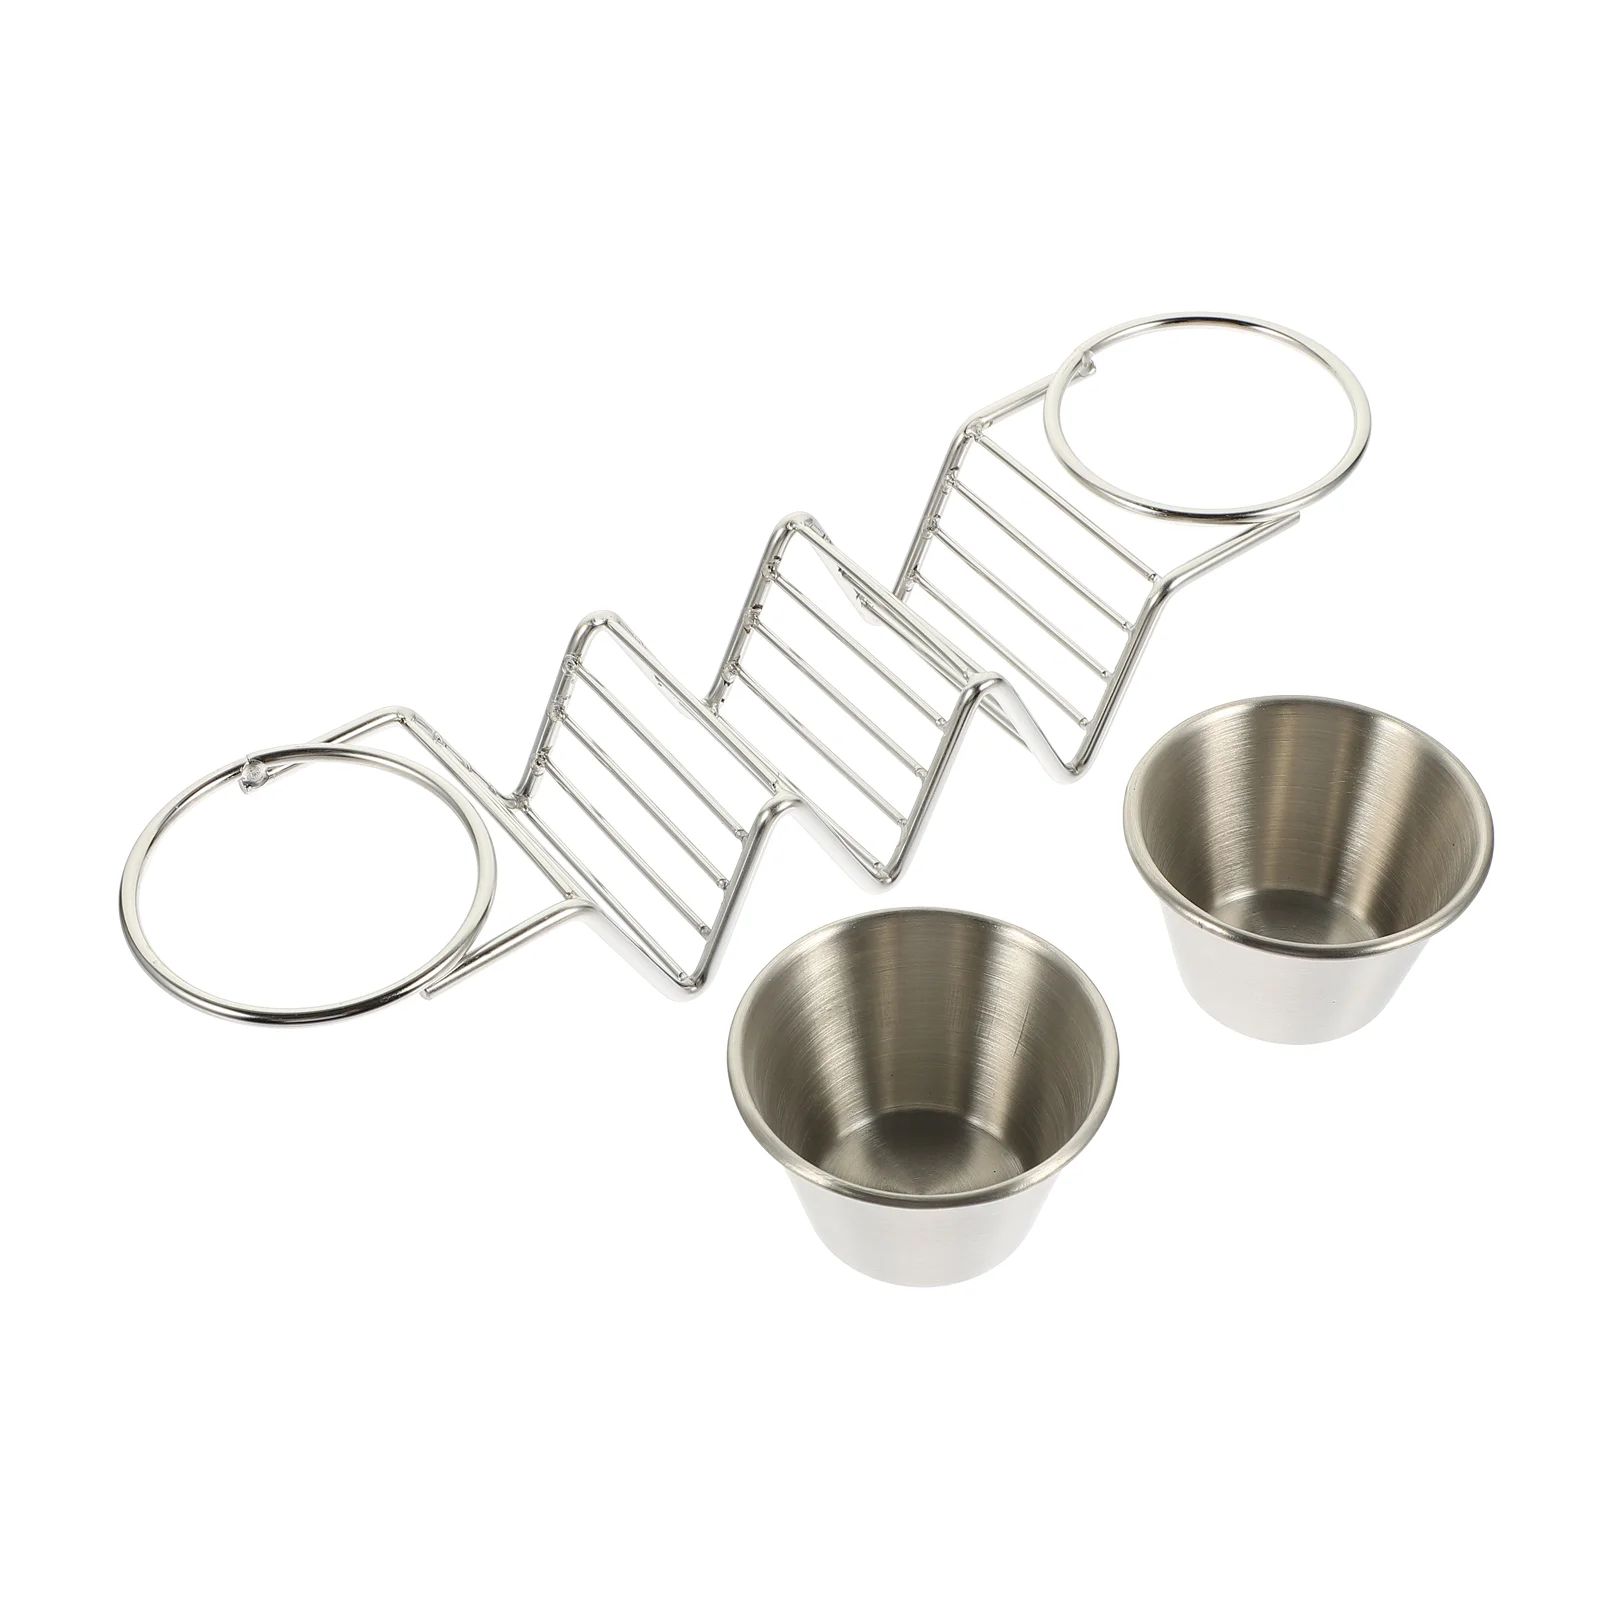 

Taco Stand Holder Rack Shell Tortilla Stainless Steel Tray Trays Tortillas Serving Stands Holders Metal Display Racks Hold Weave